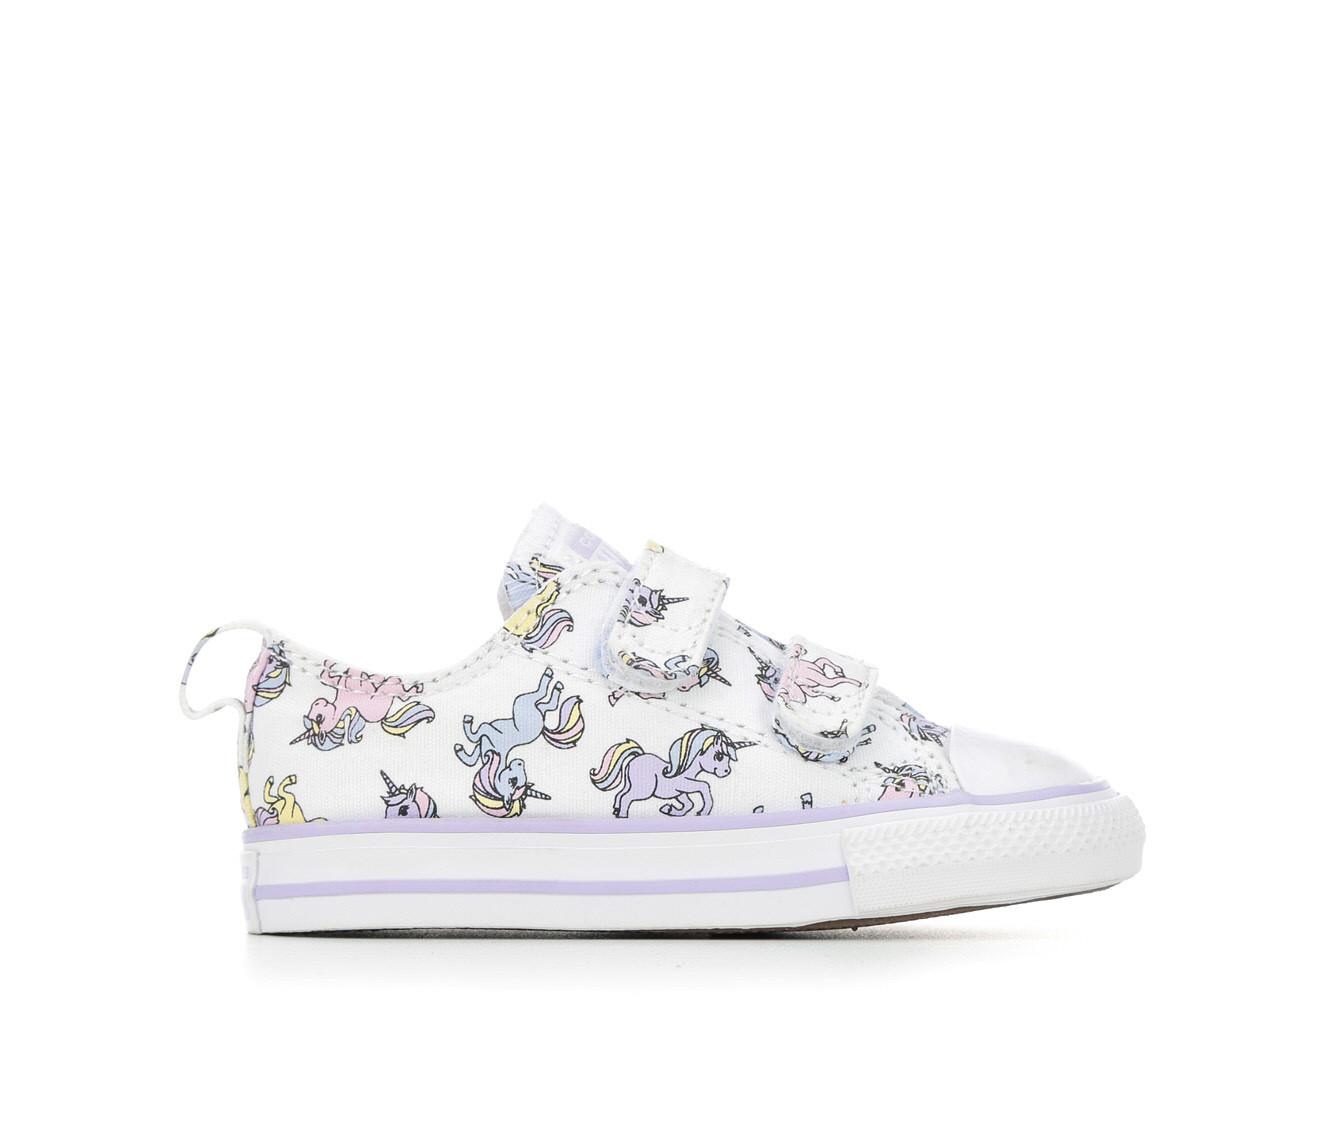 Girls' Converse Toddler Unicorn 2V Oxford Sneakers